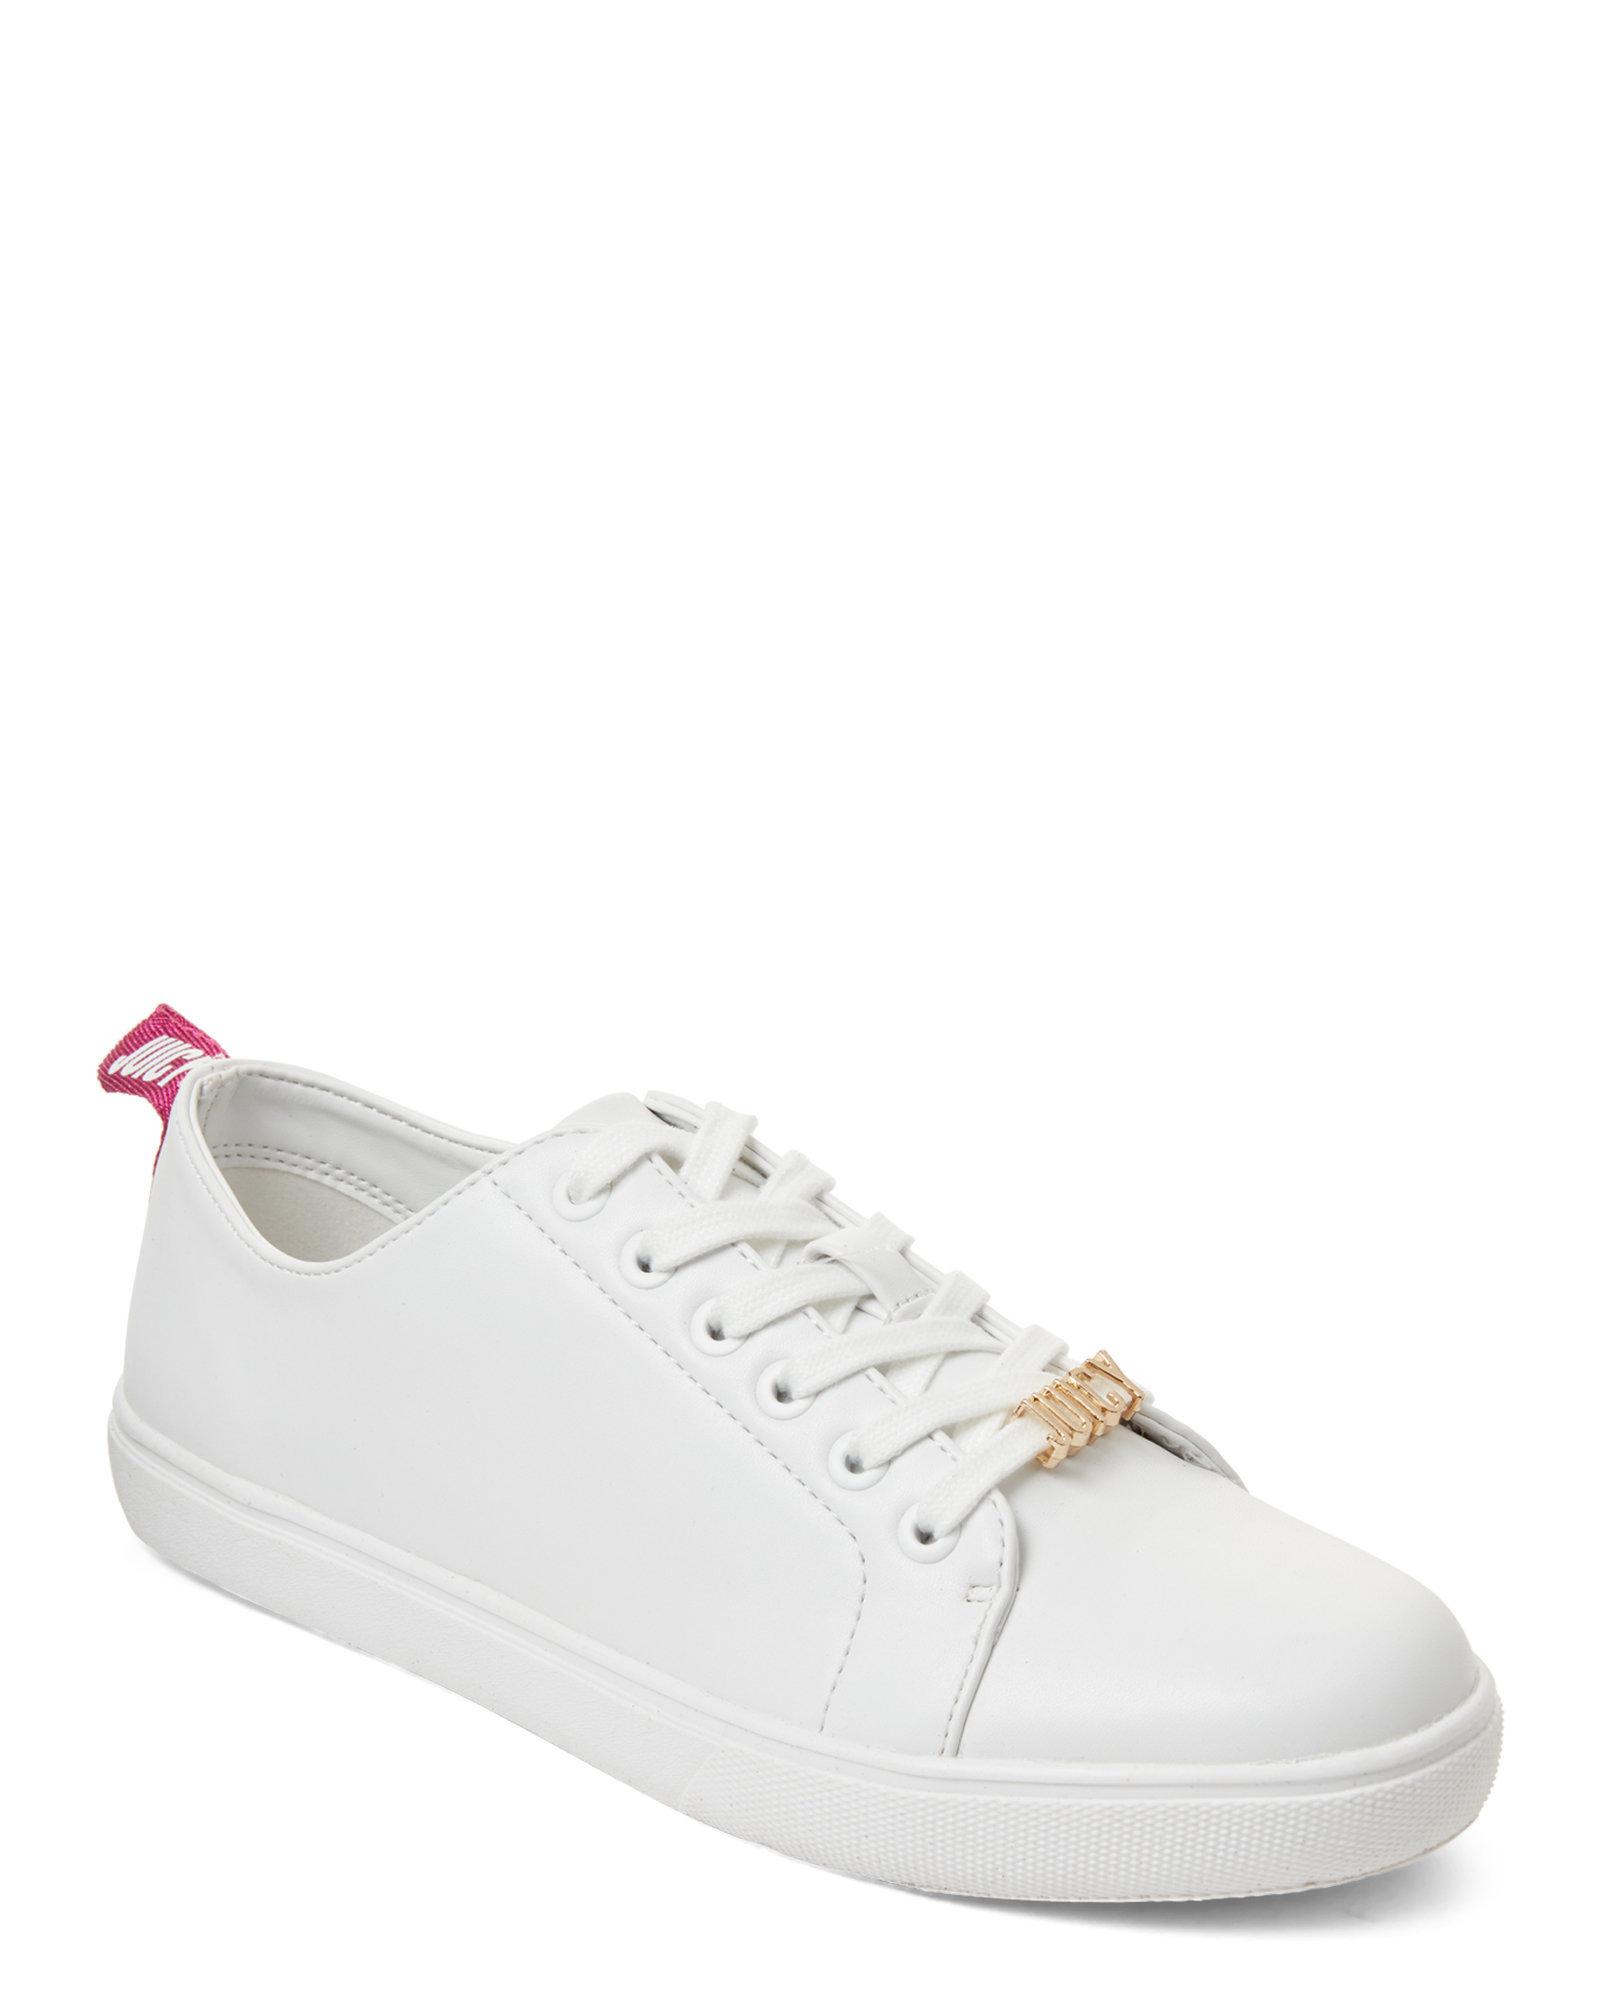 Juicy Couture White Jody Logo Low-top Sneakers - Lyst